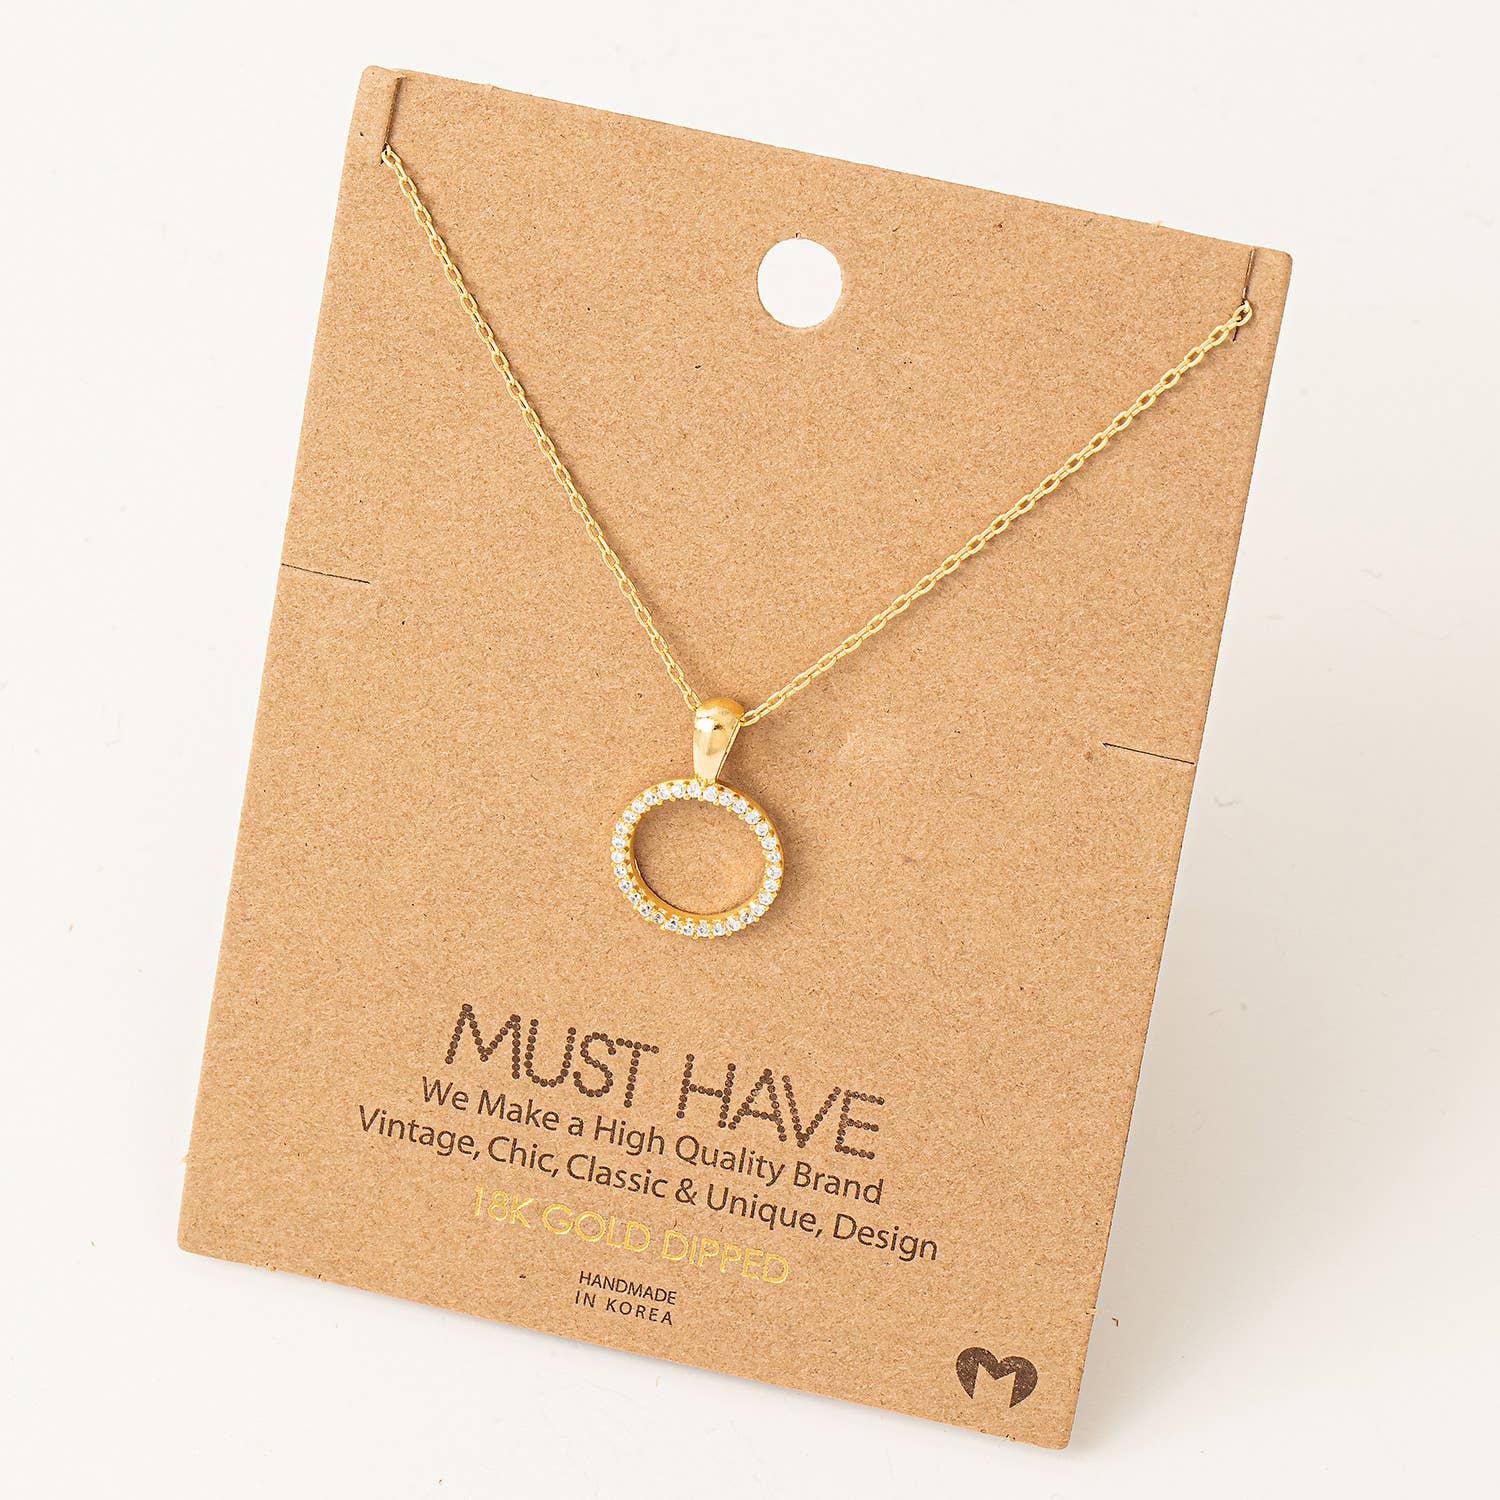 This gold dainty pave circle cutout pendant necklace is a perfect addition to your jewelry collection. Made with 18k gold and rhodium plating, it shines beautifully and adds a touch of elegance to any outfit. The necklace's approximate length of 16" makes it a versatile piece that can be worn for any occasion.